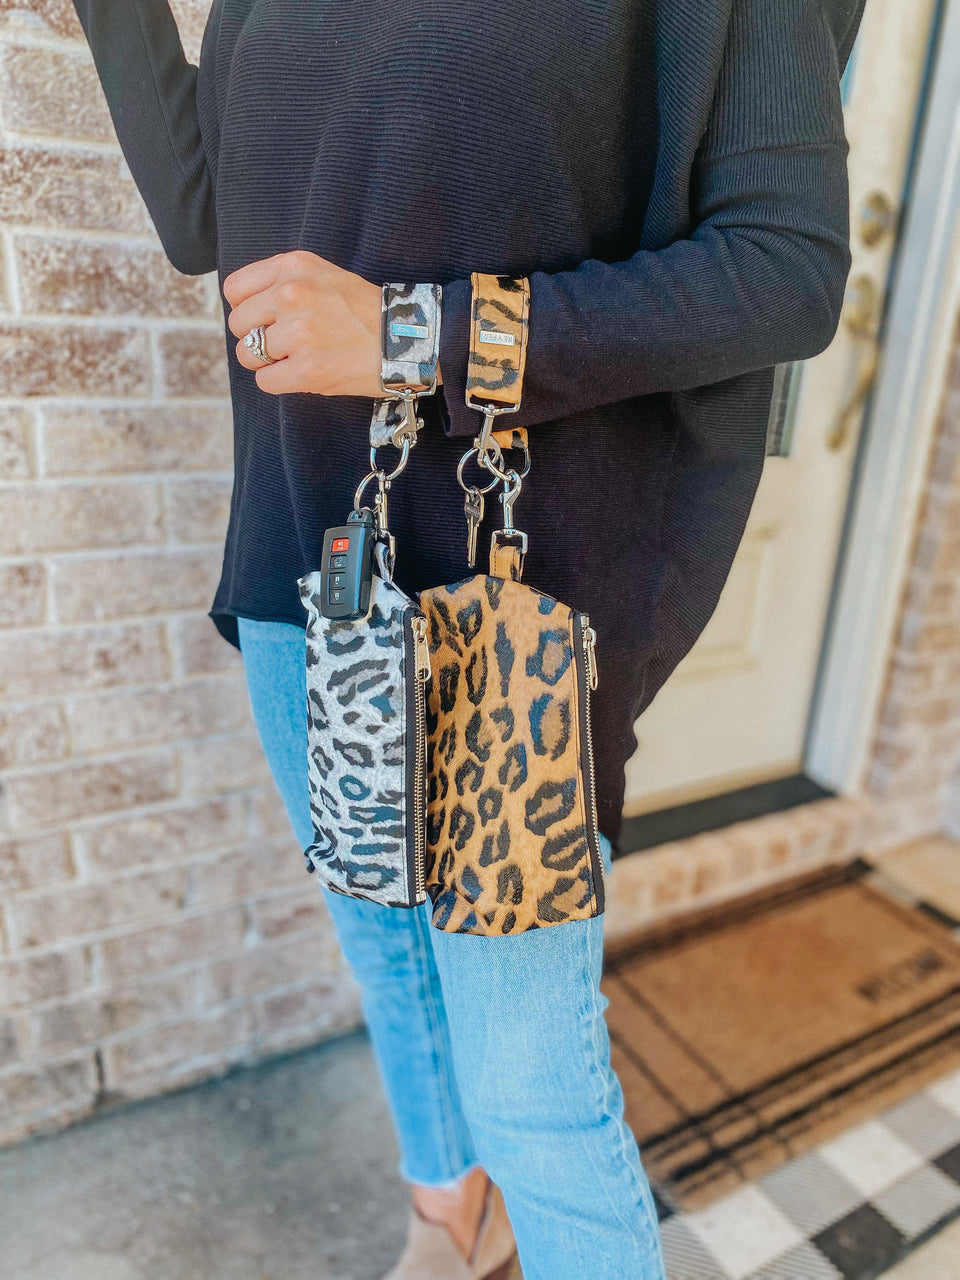 Styling Leopard for Everyday Looks